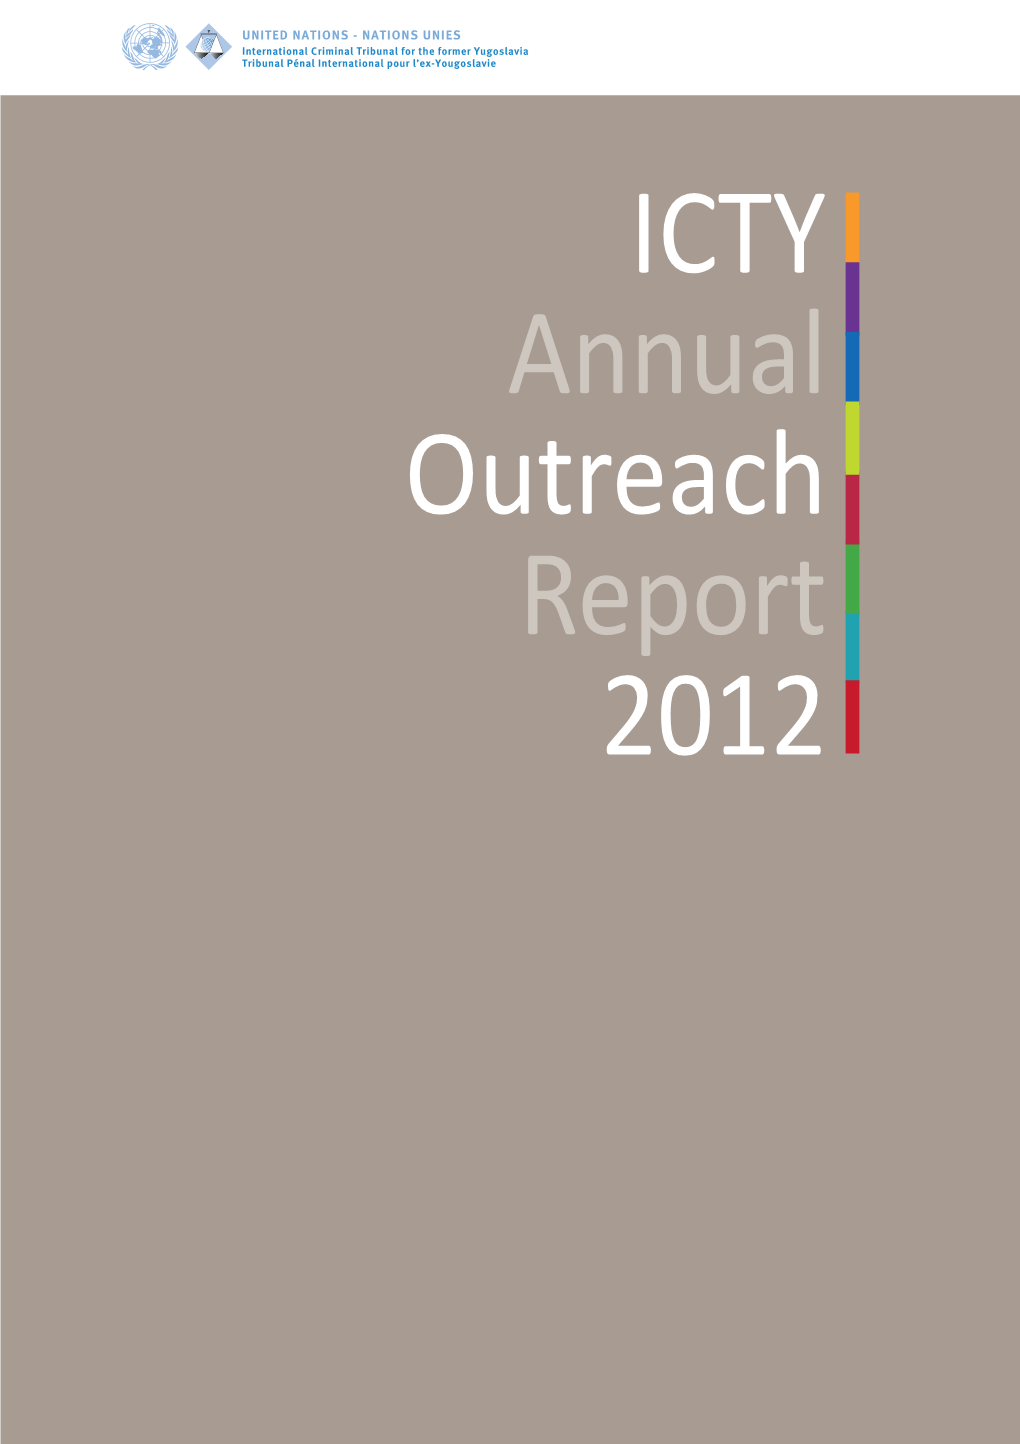 Annual Outreach Report 2012 ICTY Annual Outreach Report 2012